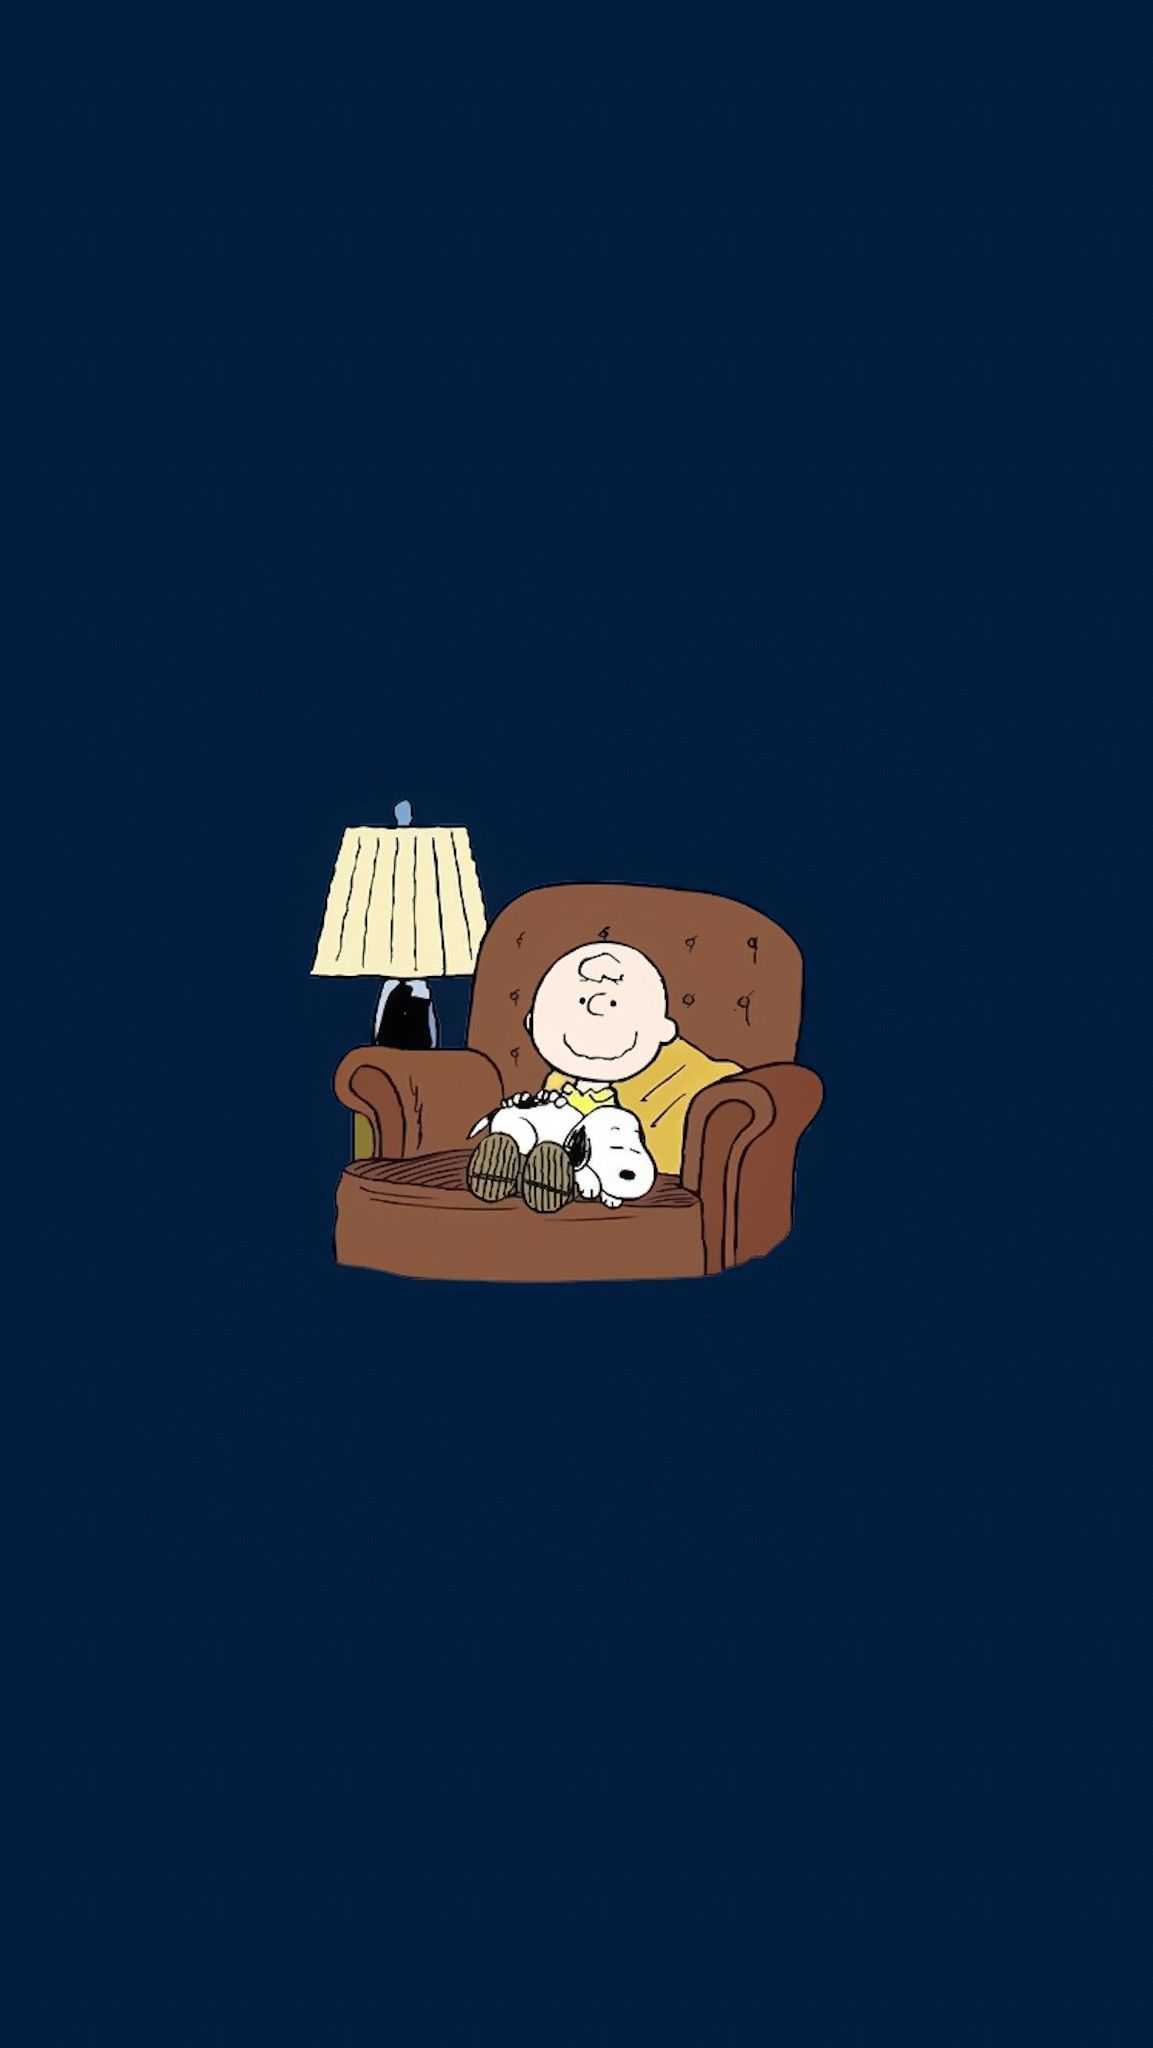 Charlie Brown and Snoopy on a couch - Charlie Brown